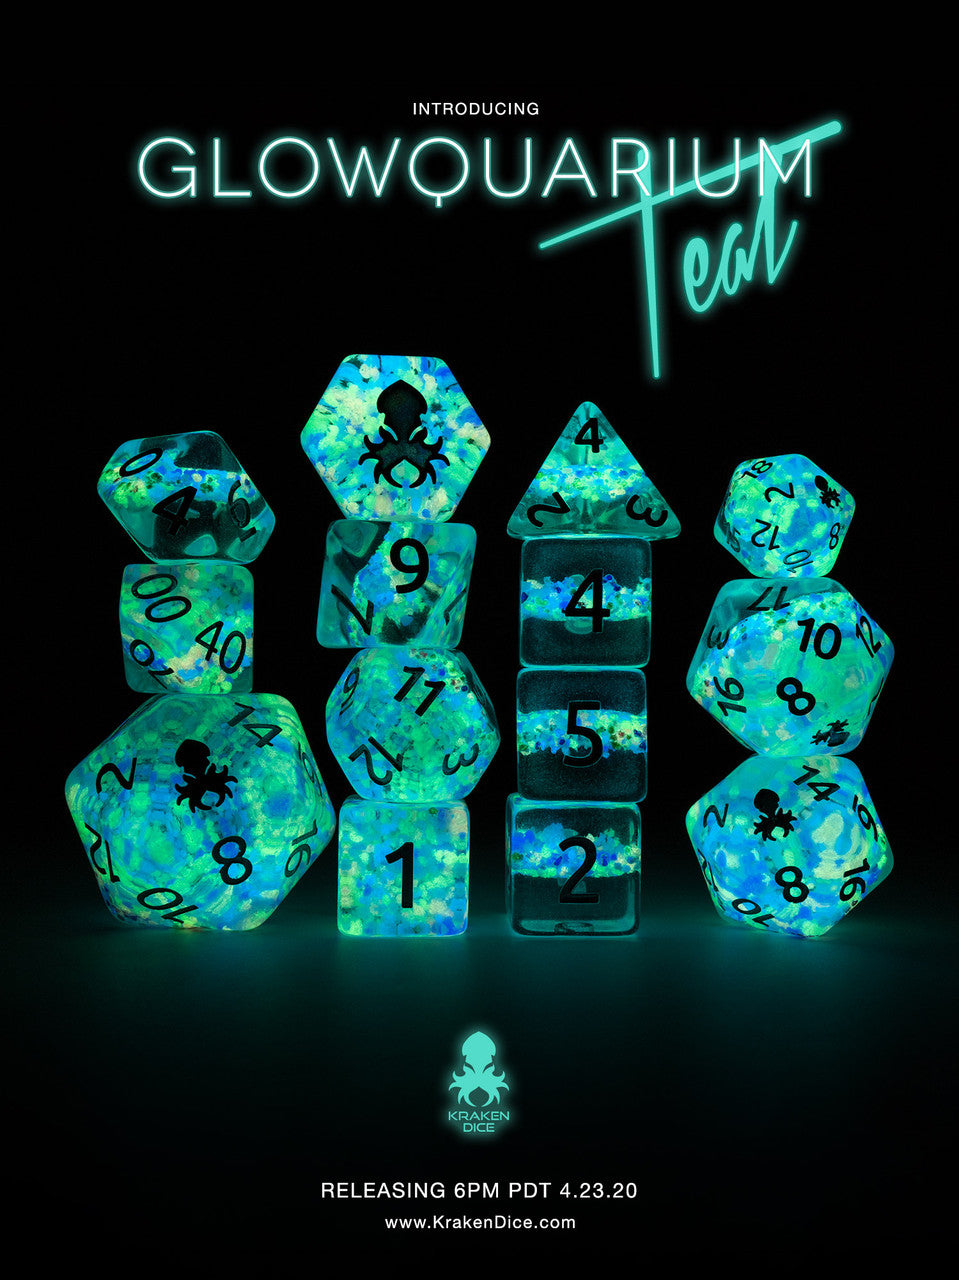 Glowquarium Teal 14pc Polyhedral Dice set with Glow in the Dark Particles